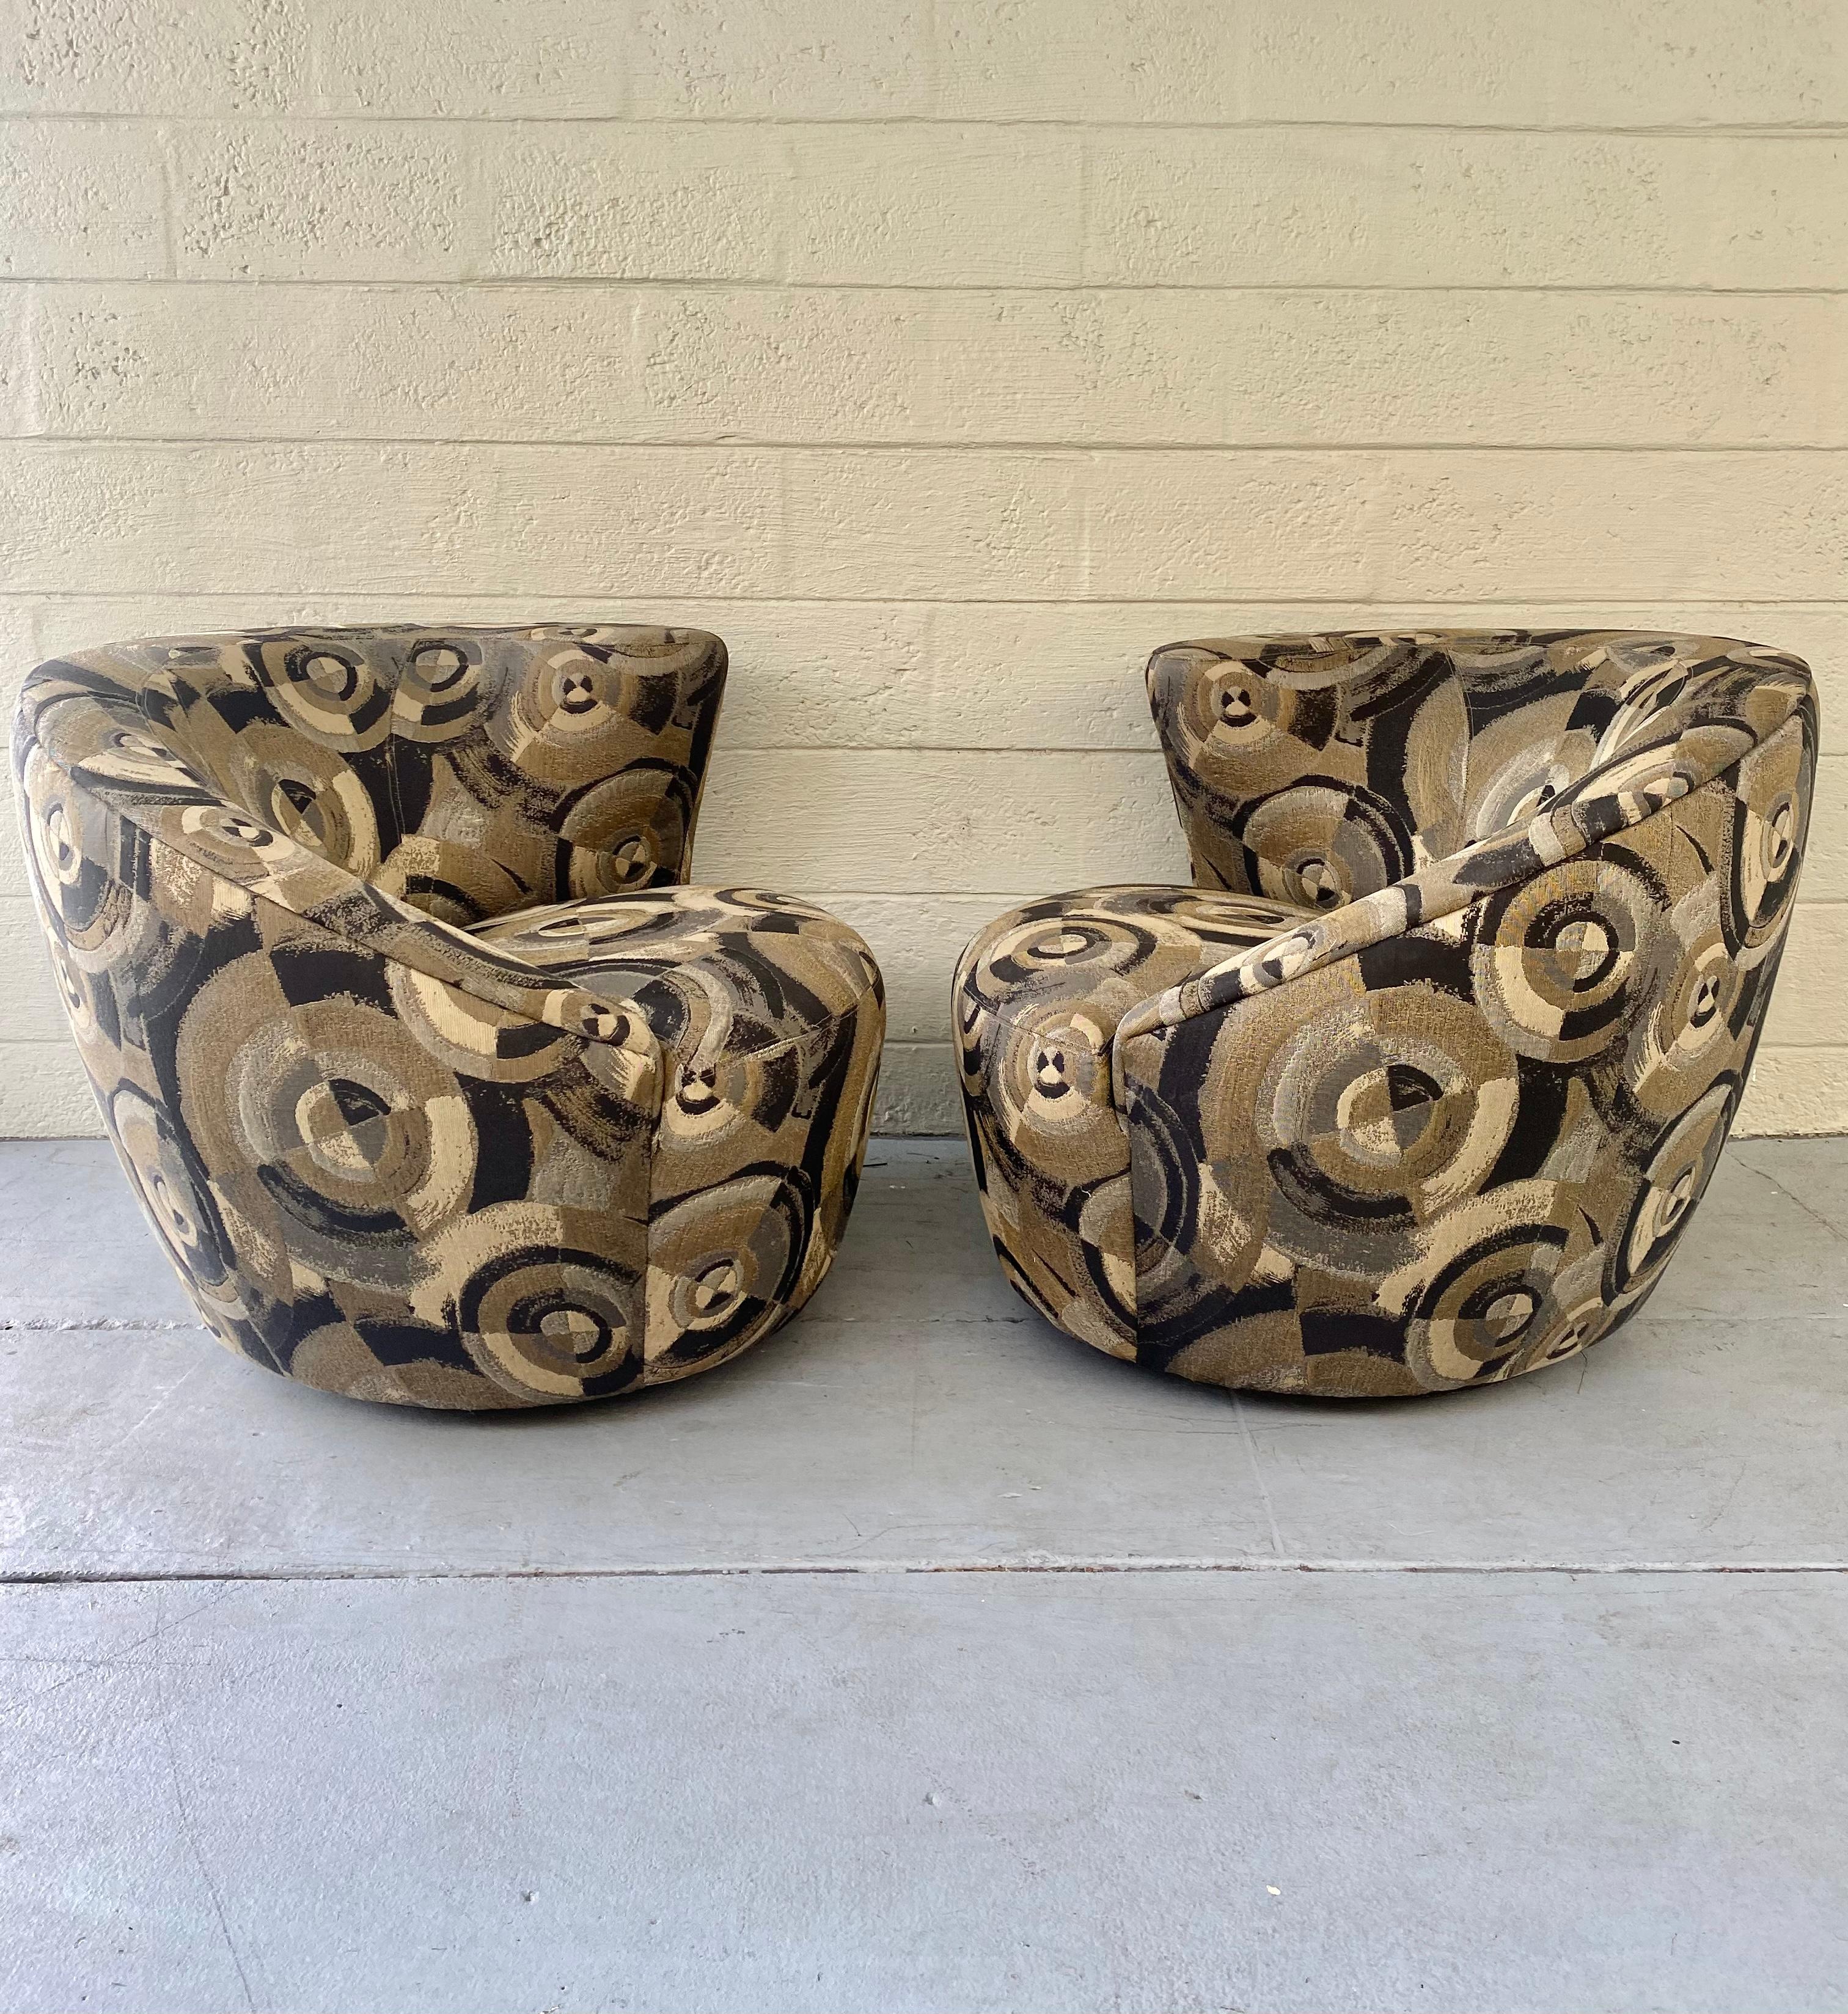 These rare XL Iconic swivel chairs are packed with personality! Outstanding abstract design is exhibited throughout the monumental form. Post modern Weiman swivel chairs are beyond cool. The unique corkscrew shape also feature a comfortable sculpted